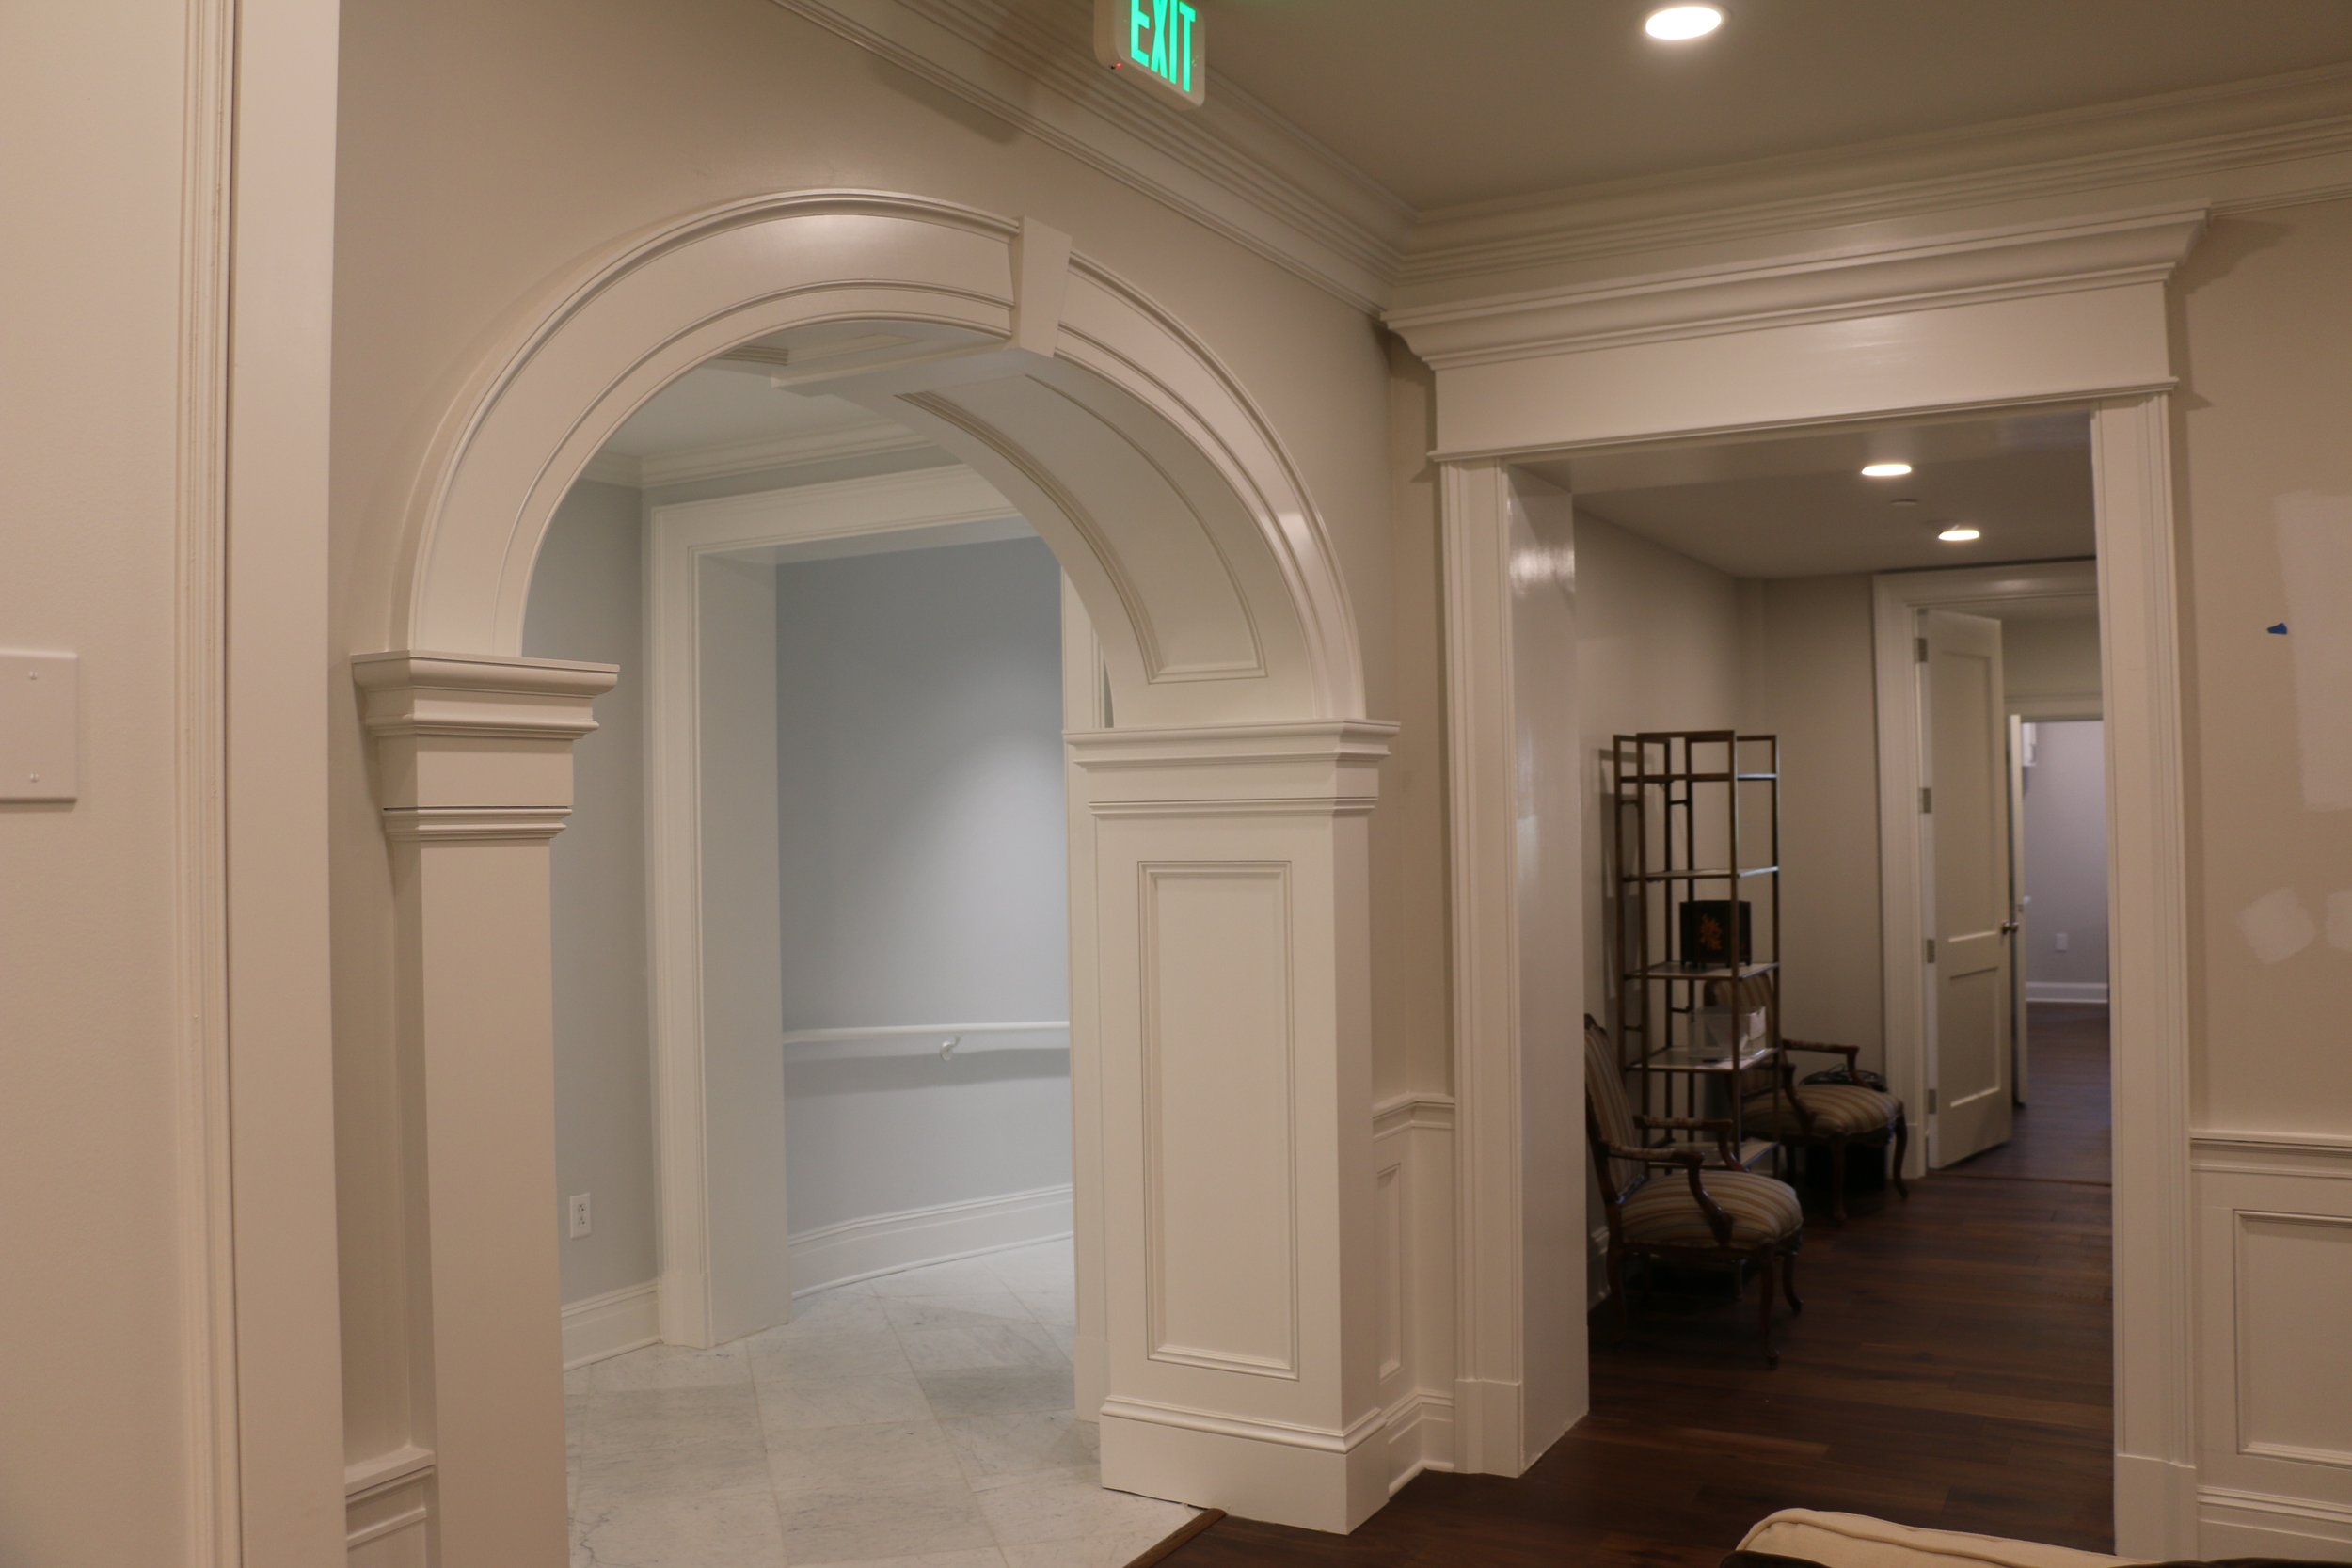   Associated Architectural Products   Full-Scale Casework &amp; Millwork   Learn More  